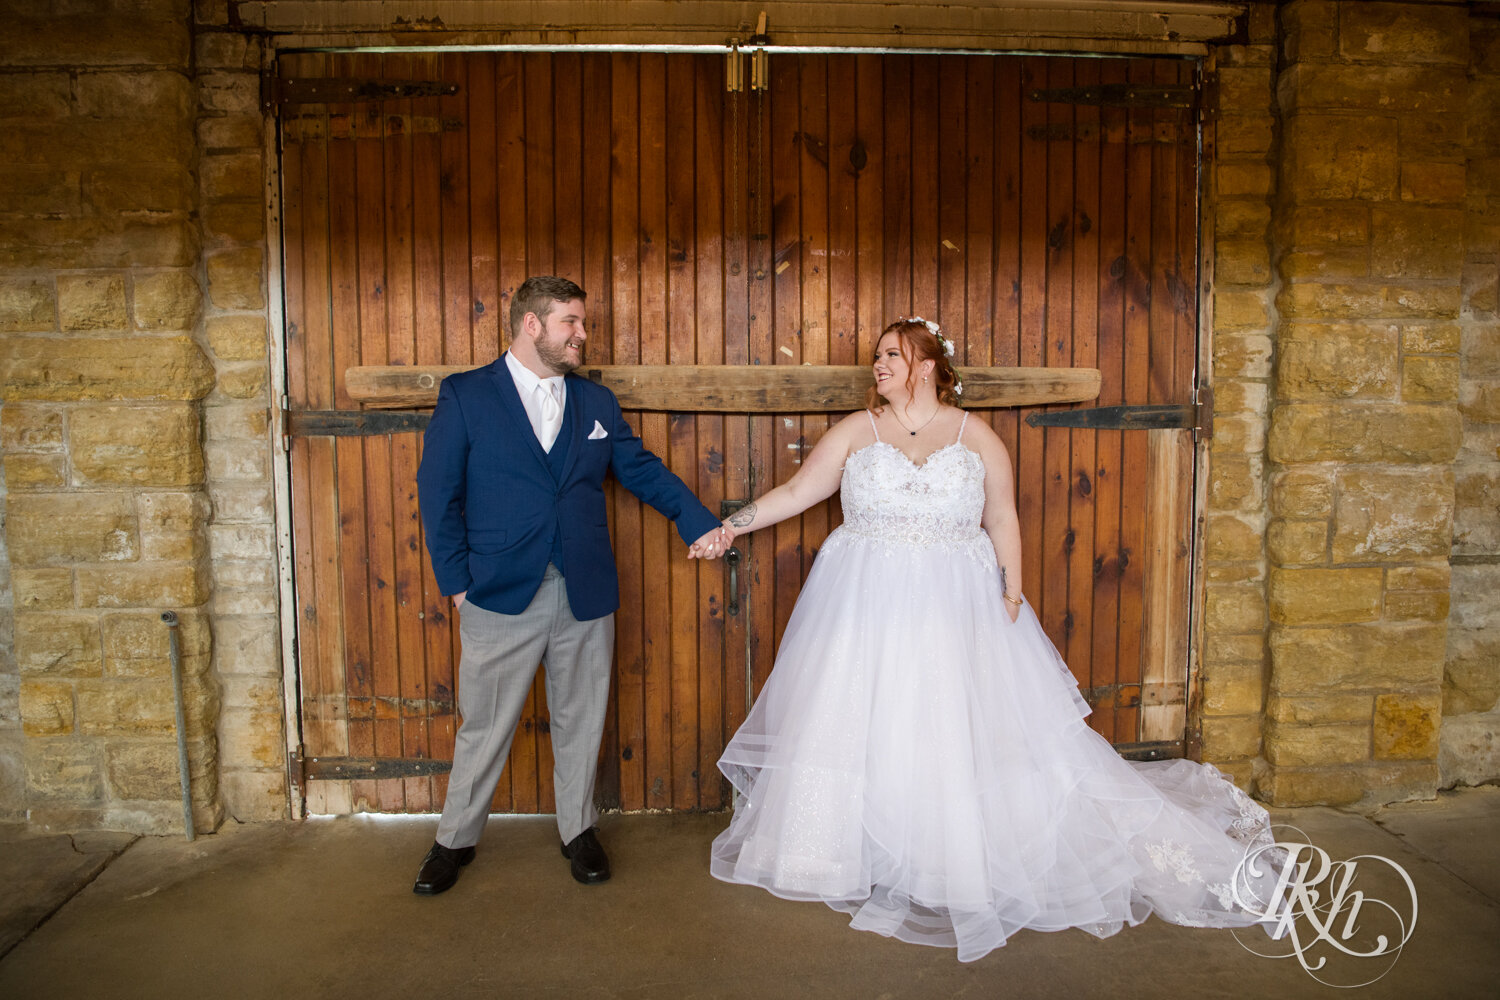 Plus size bride and groom hold hands at wedding at Olmsted County Fairgrounds in Rochester, Minnesota.